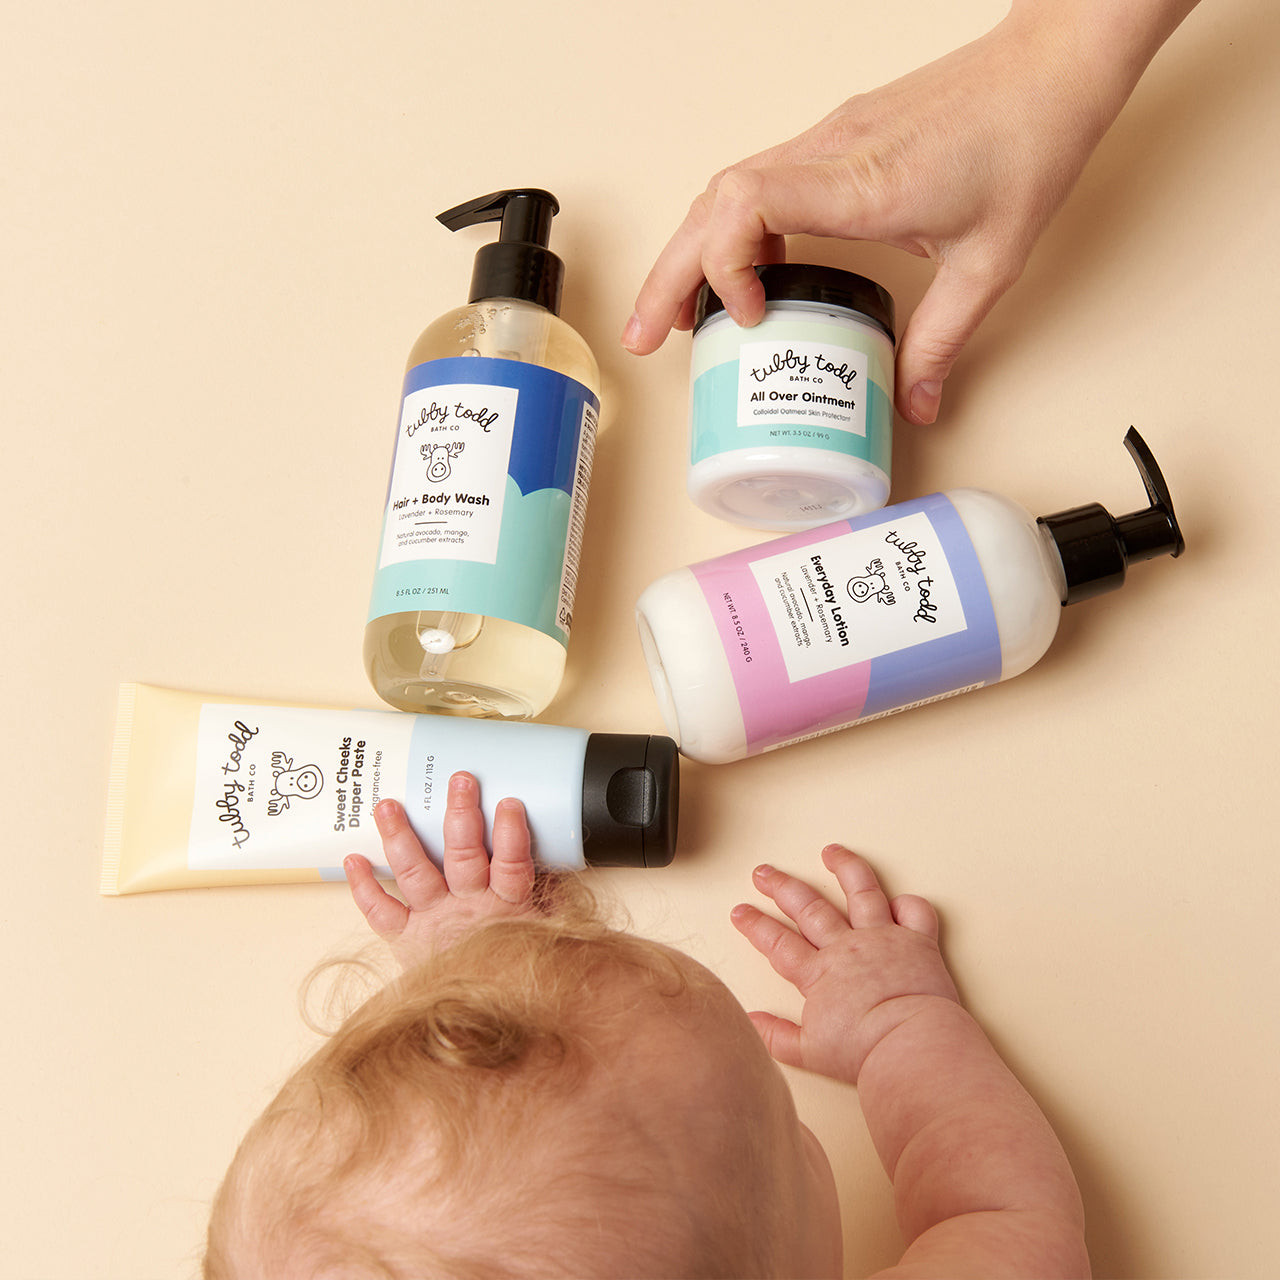 Baby laying next to Baby Bundle products on background.